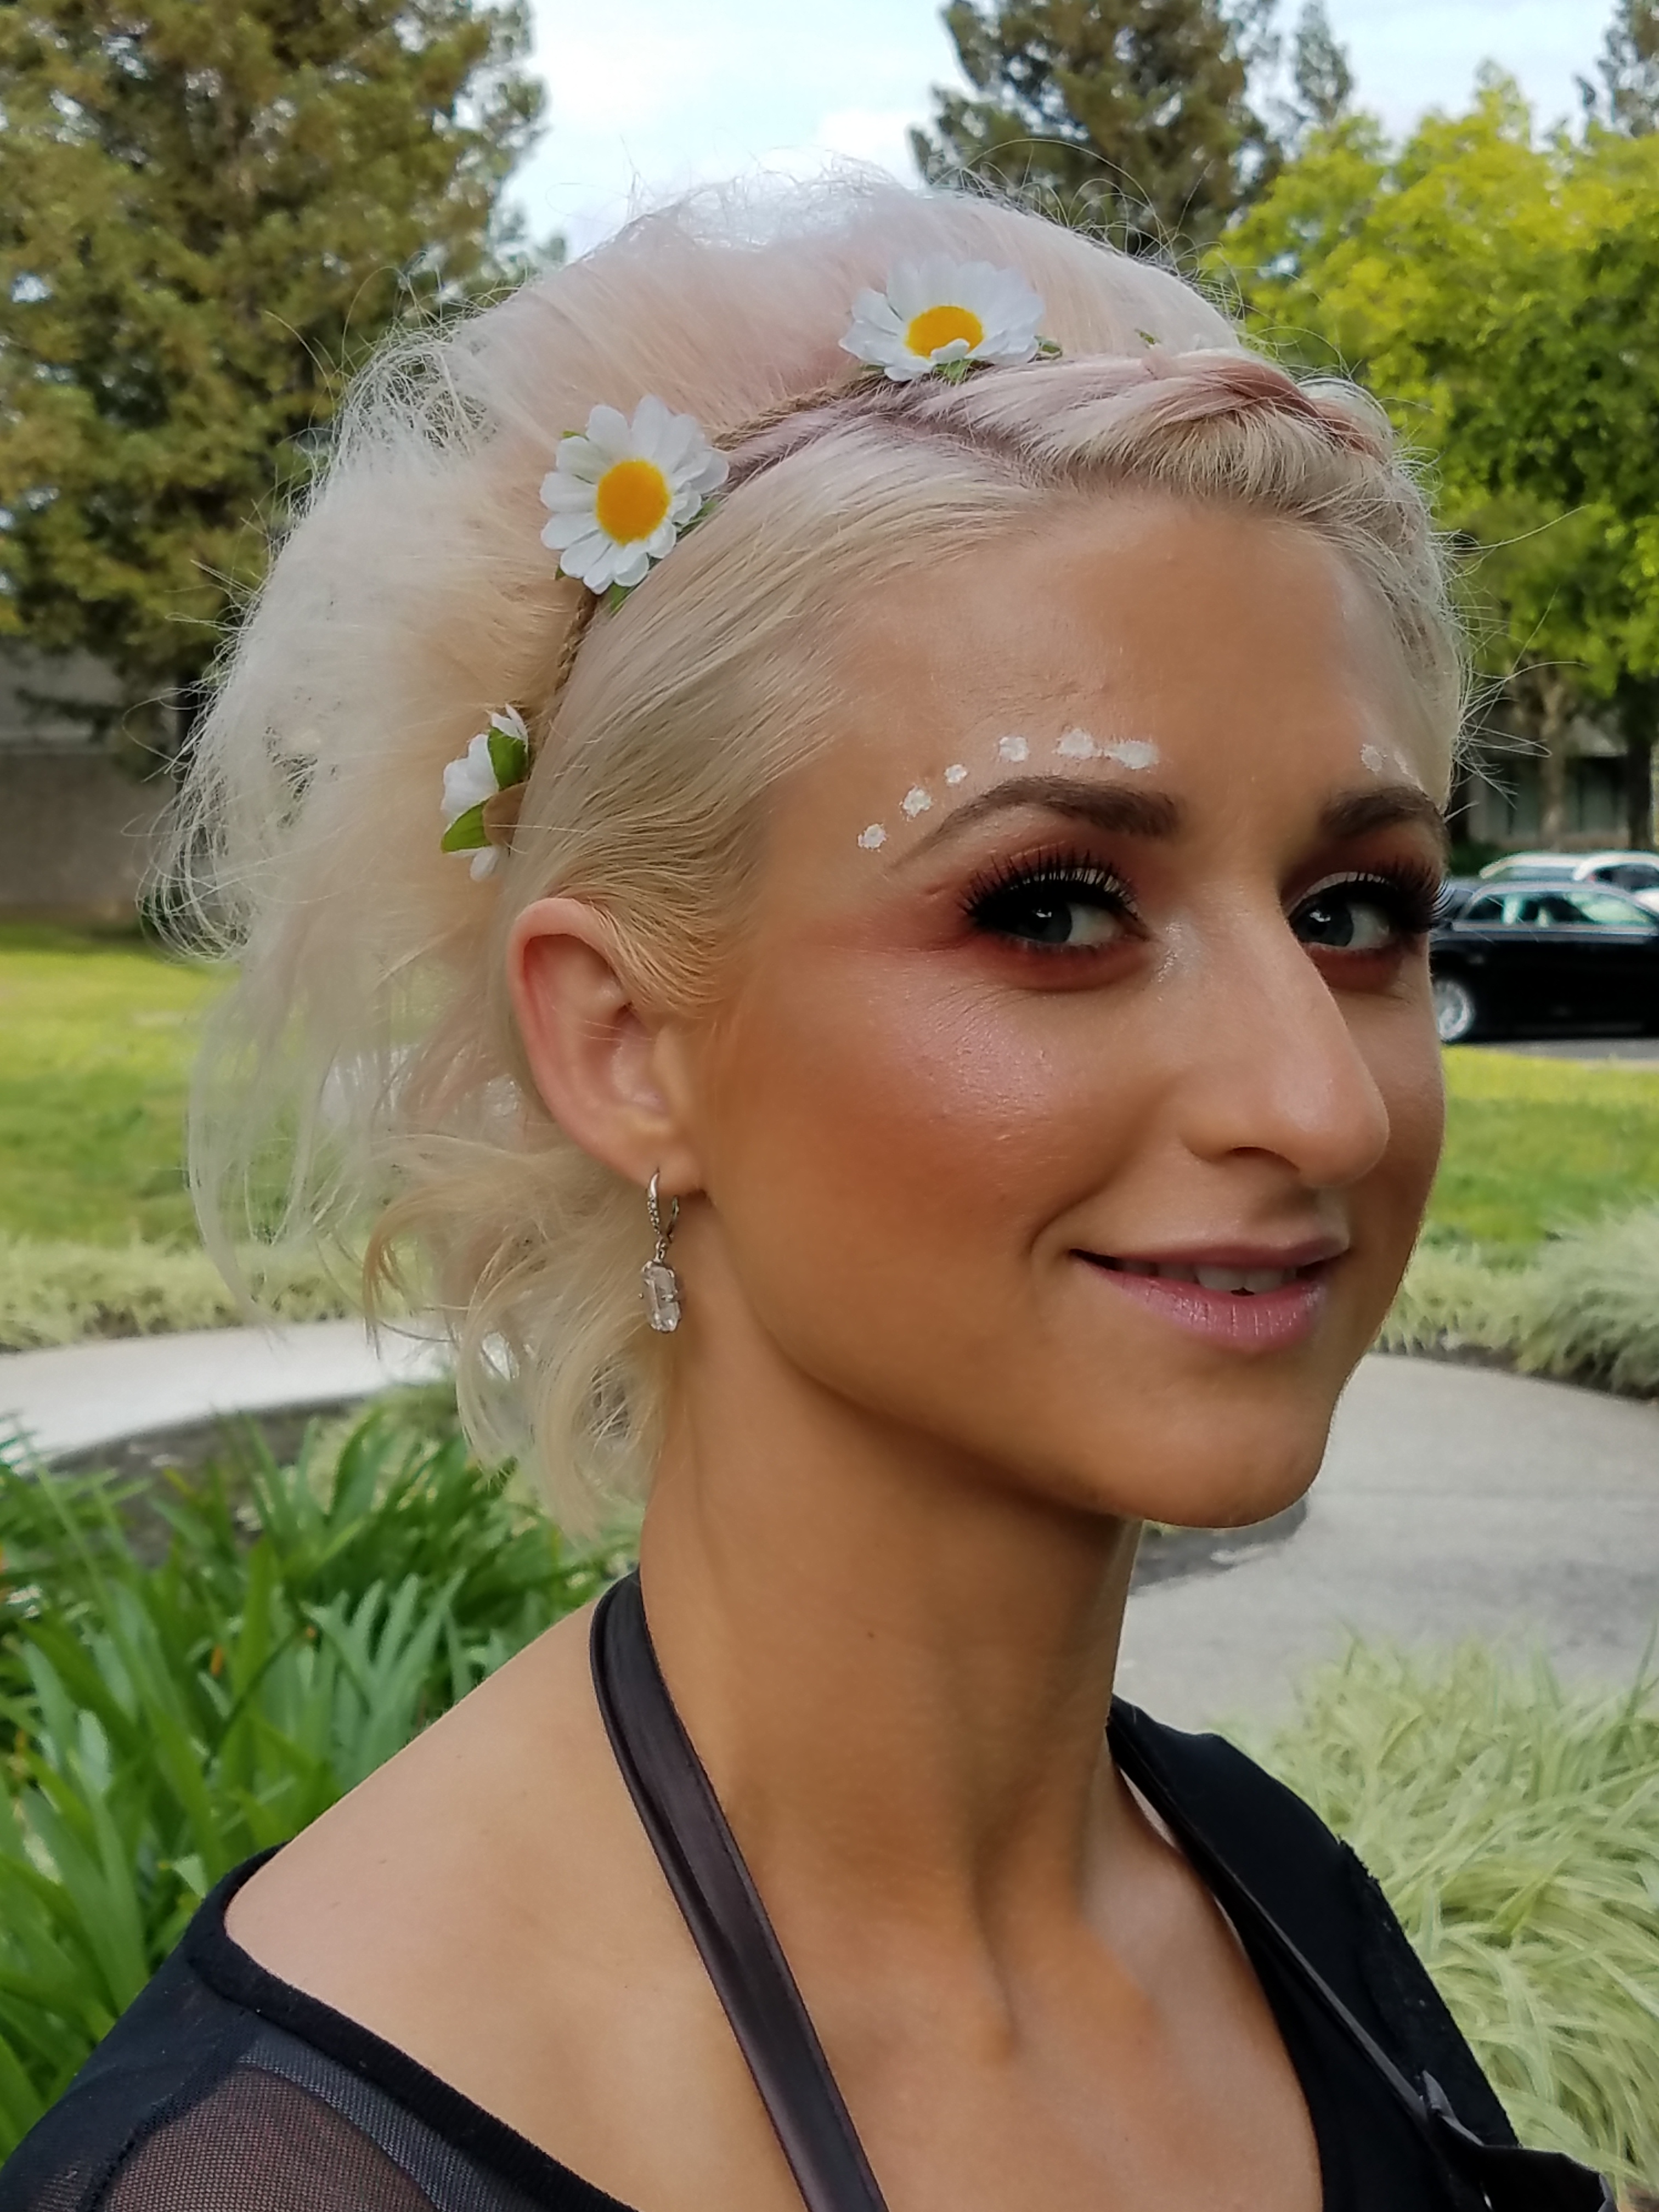 Cute floral headband and eyebrow dots for a festival.